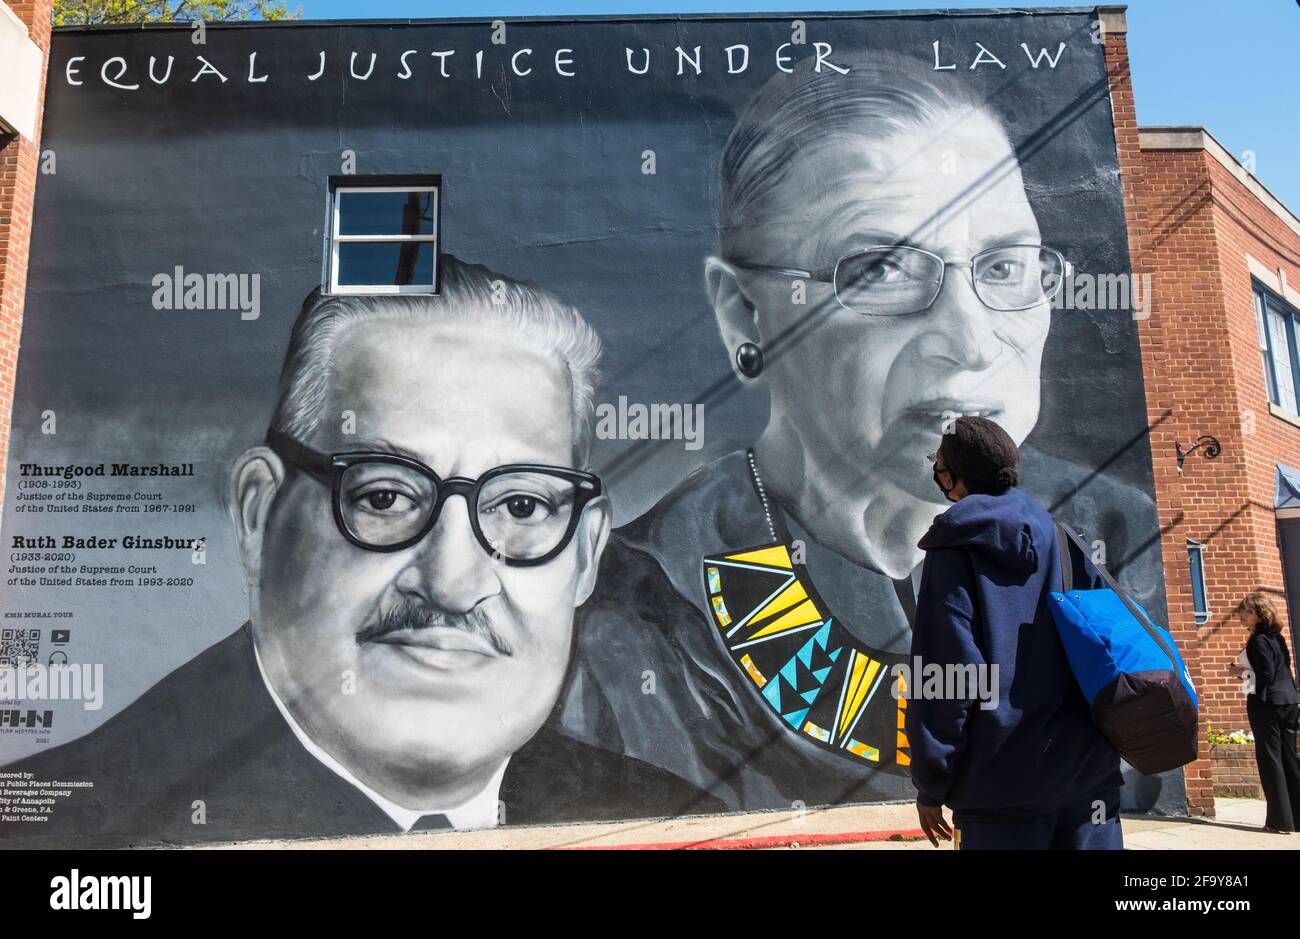 Equal Justice Under Law mural in Annapolis, MD Stock Photo